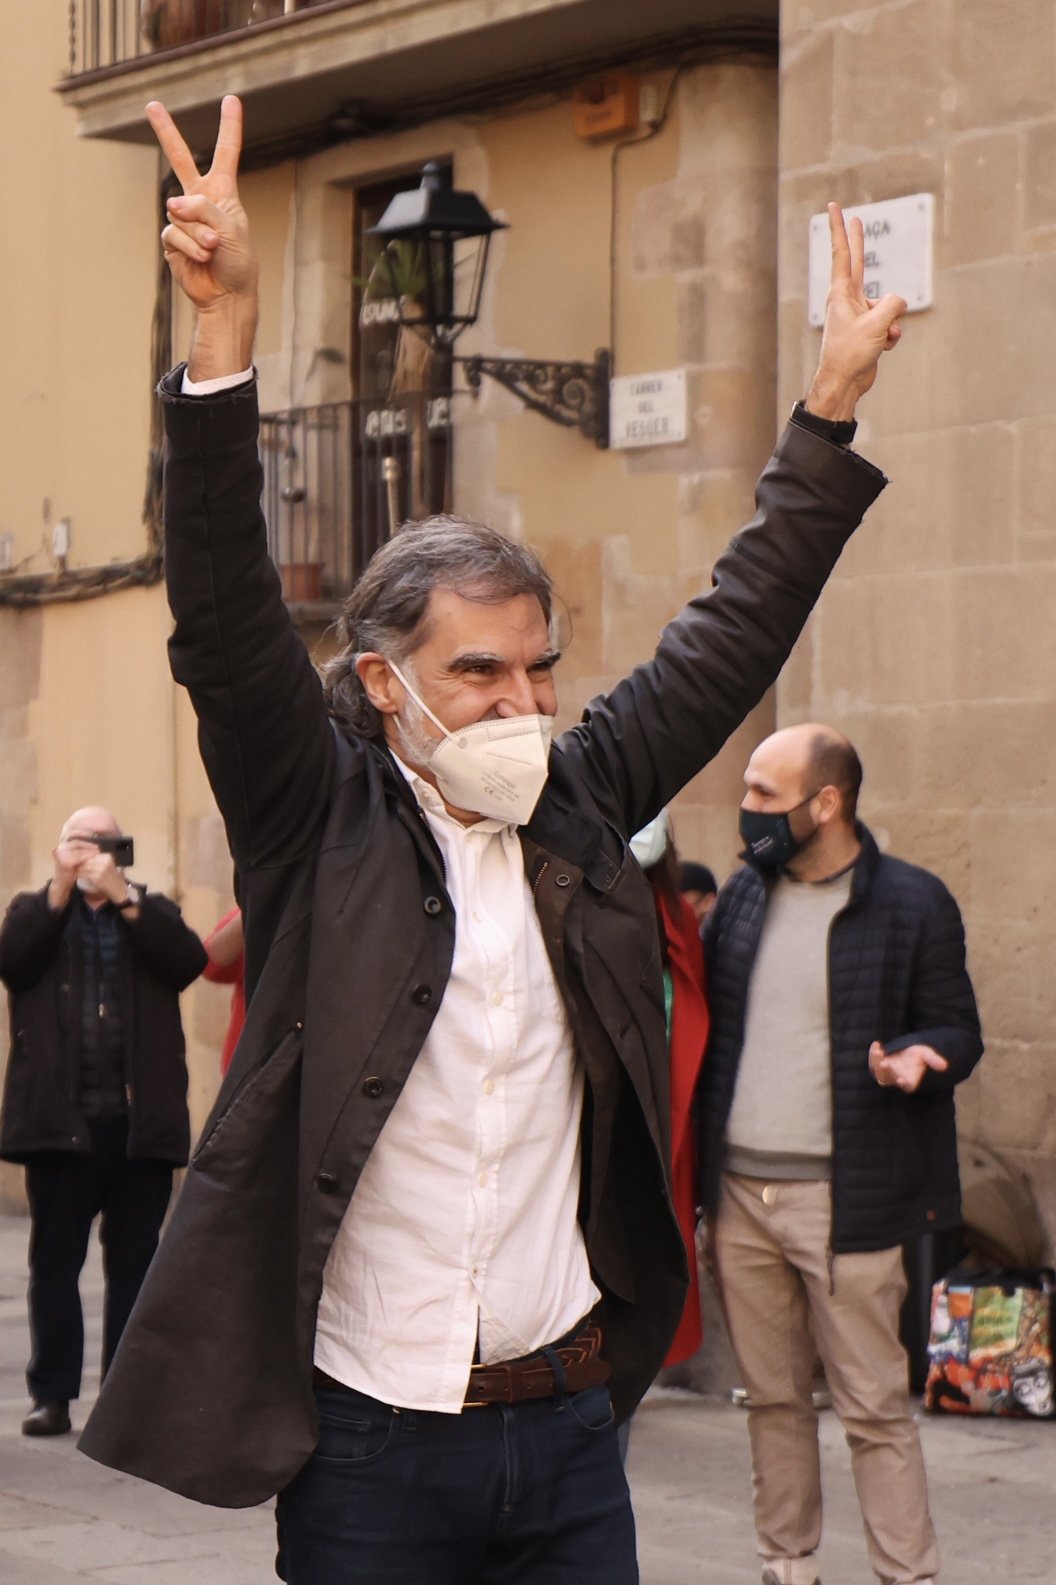 Jordi Cuixart: "Let's fill the ballot boxes with pro-independence votes"